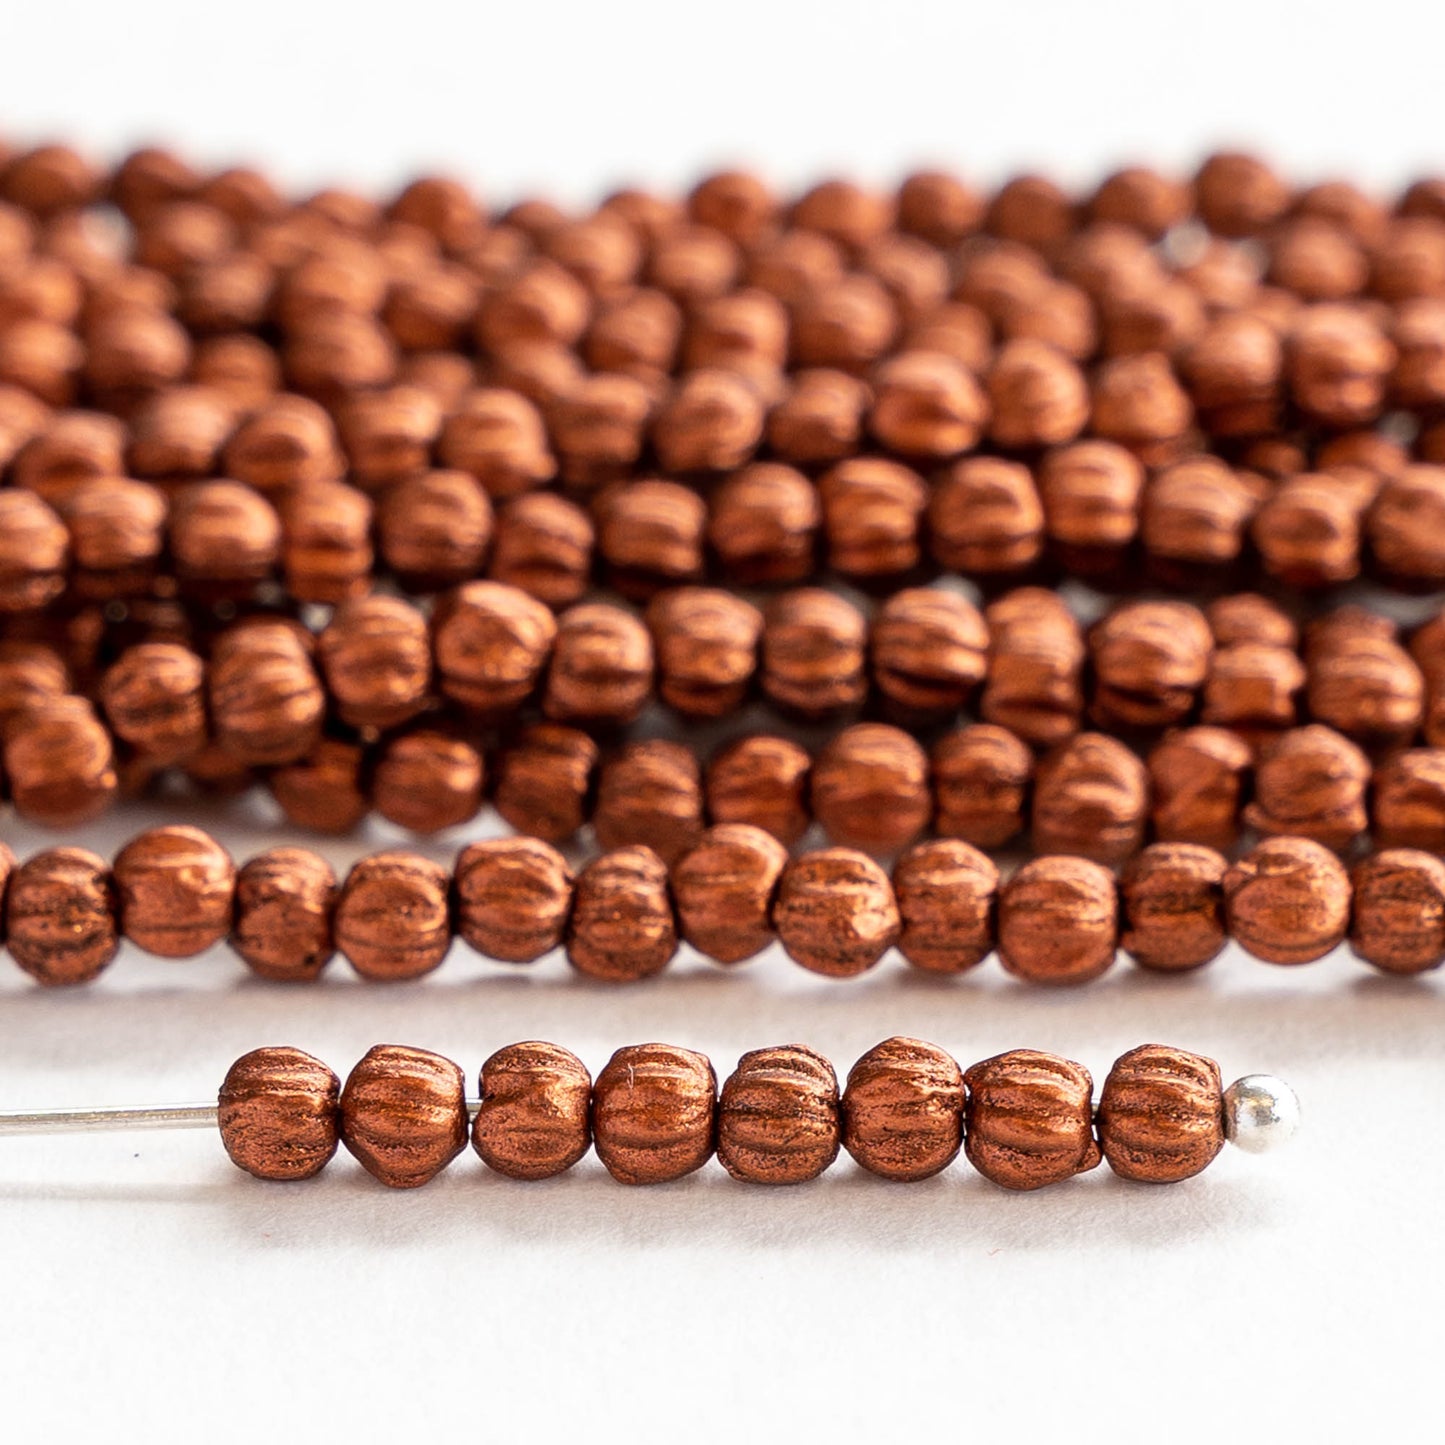 3mm Glass Melon Beads - Copper - 100 Beads